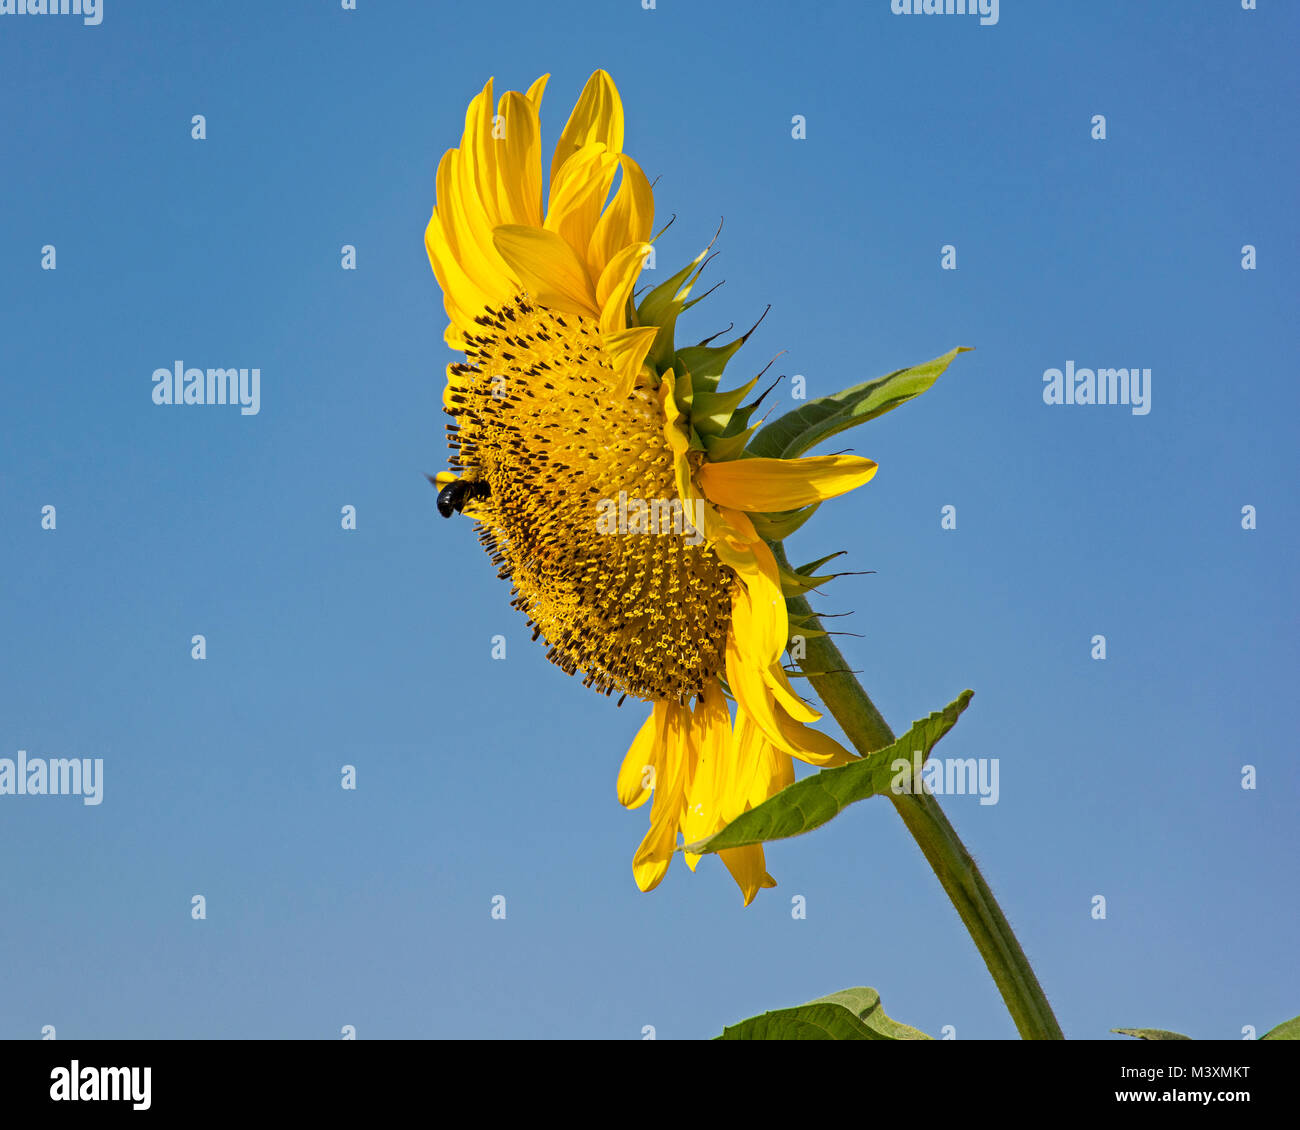 side view of a black and yellow bumblebee on giant sunflower with a clear blue sky in the background Stock Photo